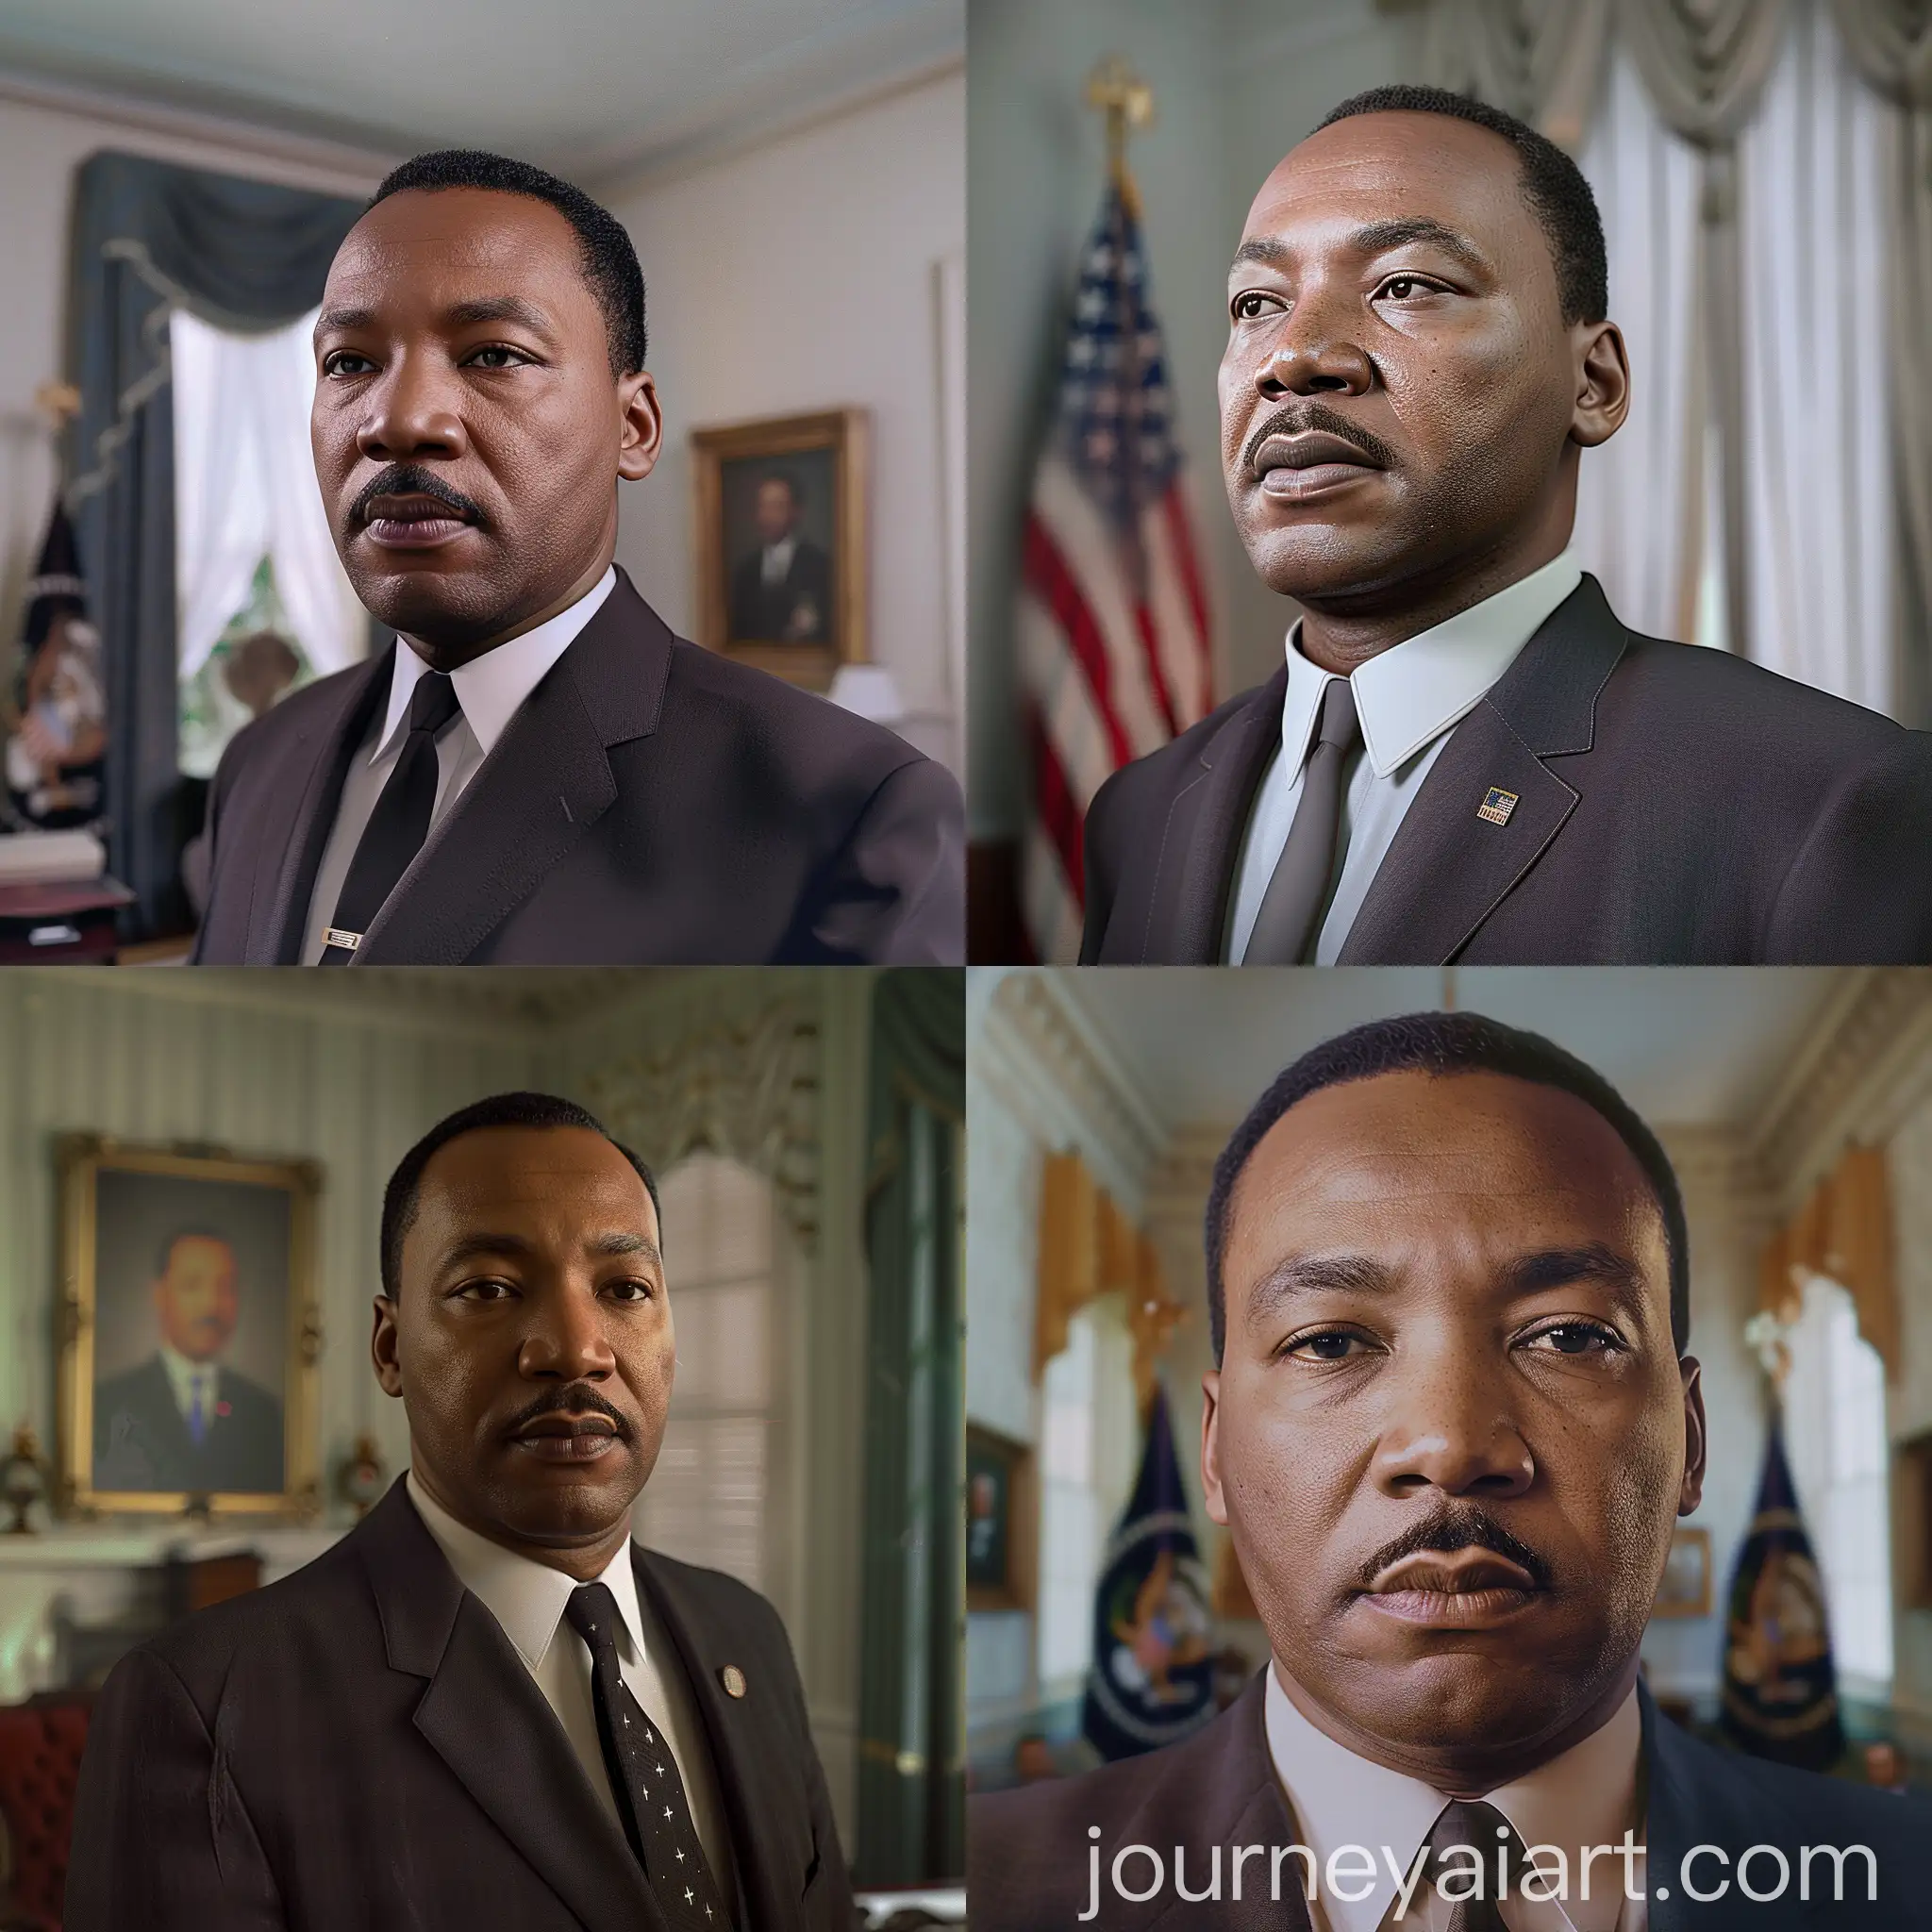 Martin-Luther-King-Jr-Portrait-in-the-Oval-Office-of-the-White-House